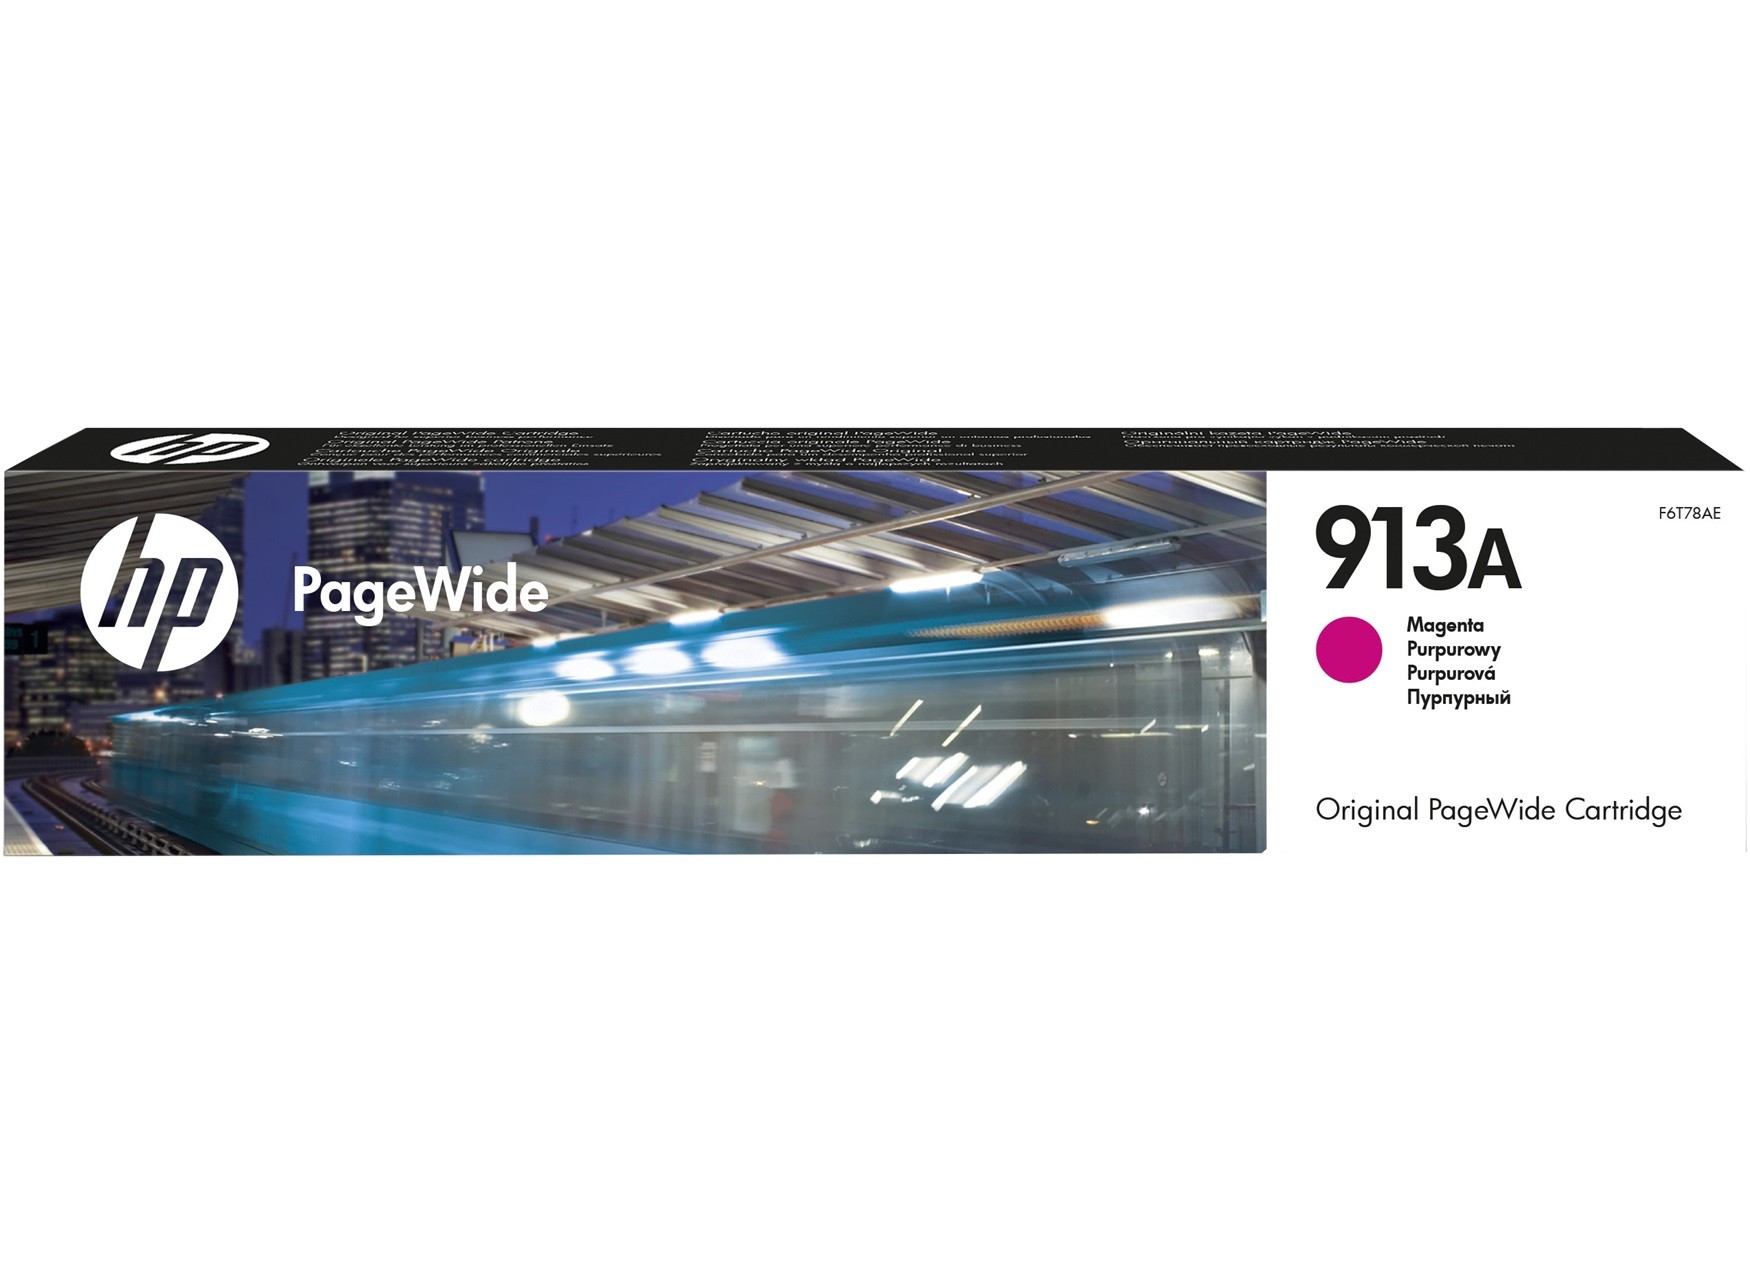 Toner HP 913A cartouche d'encre PageWide magenta (F6T78AE)